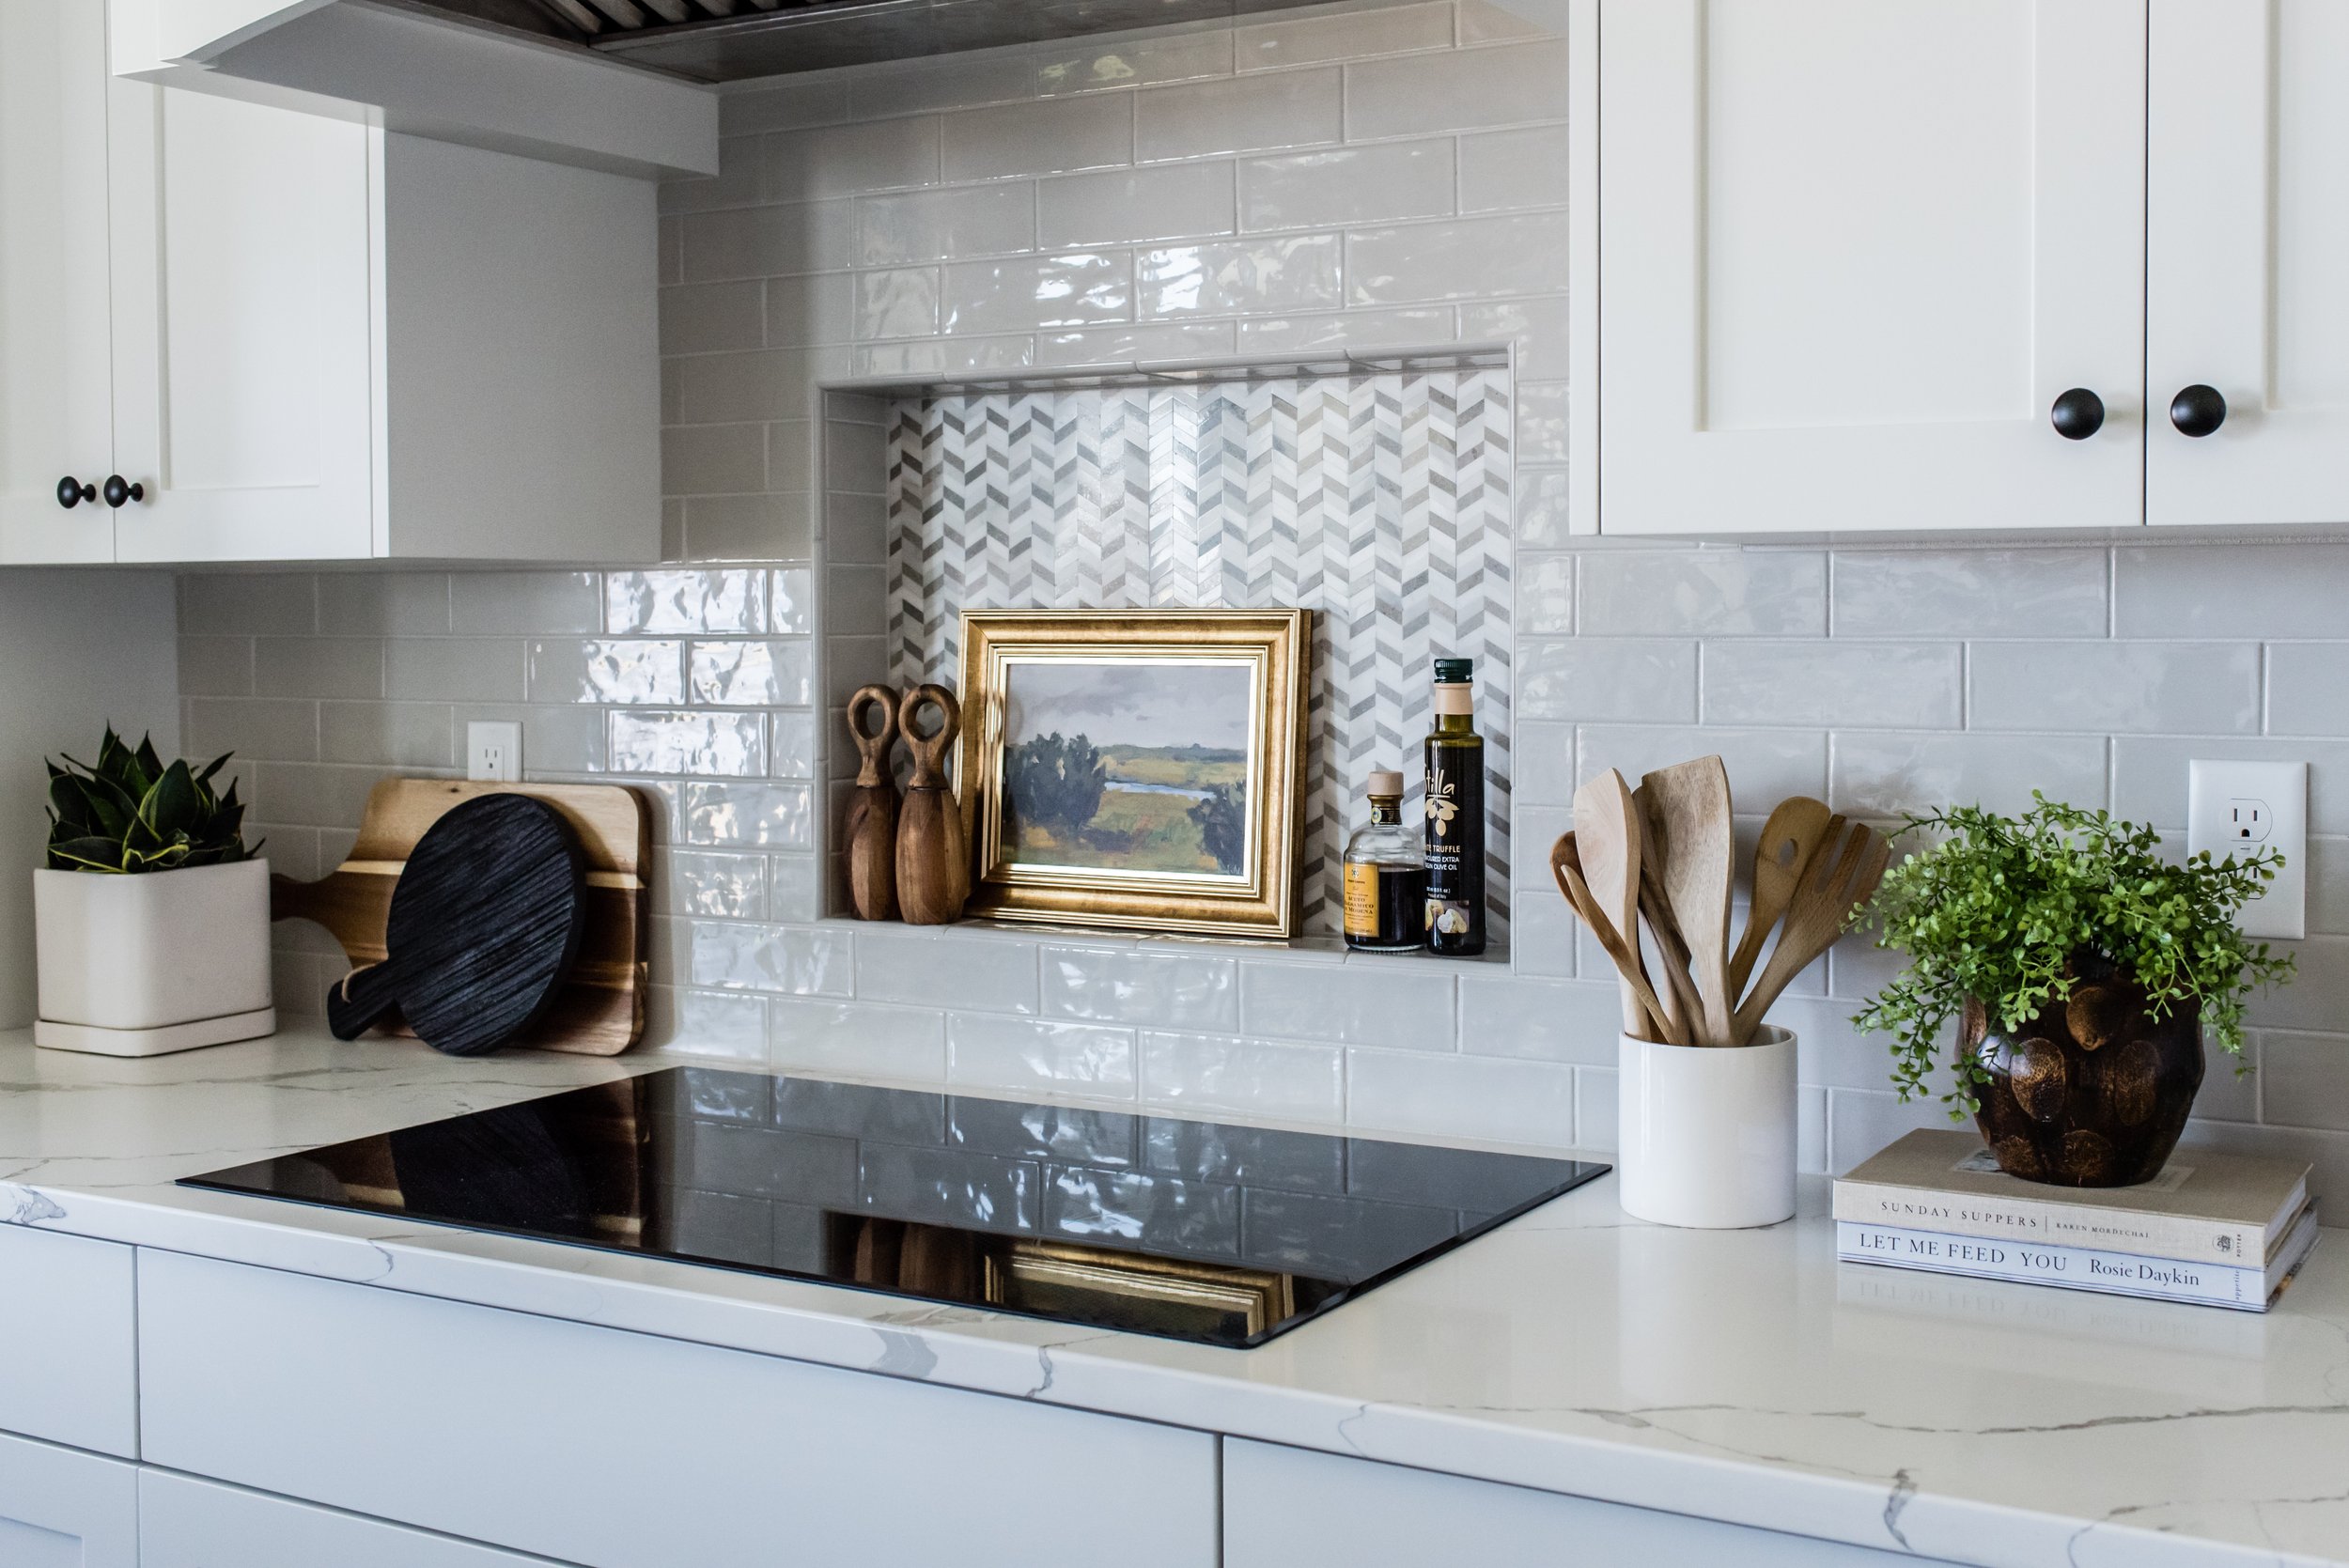  Chevron pattern tile draws focus to the recessed part of the backsplash and is a perfect statement piece for this white kitchen. Recessed backsplash white kitchen Liz Powell Hyde Park Utah #recessbacksplash #whitekitchen #architecturestatementpiece 